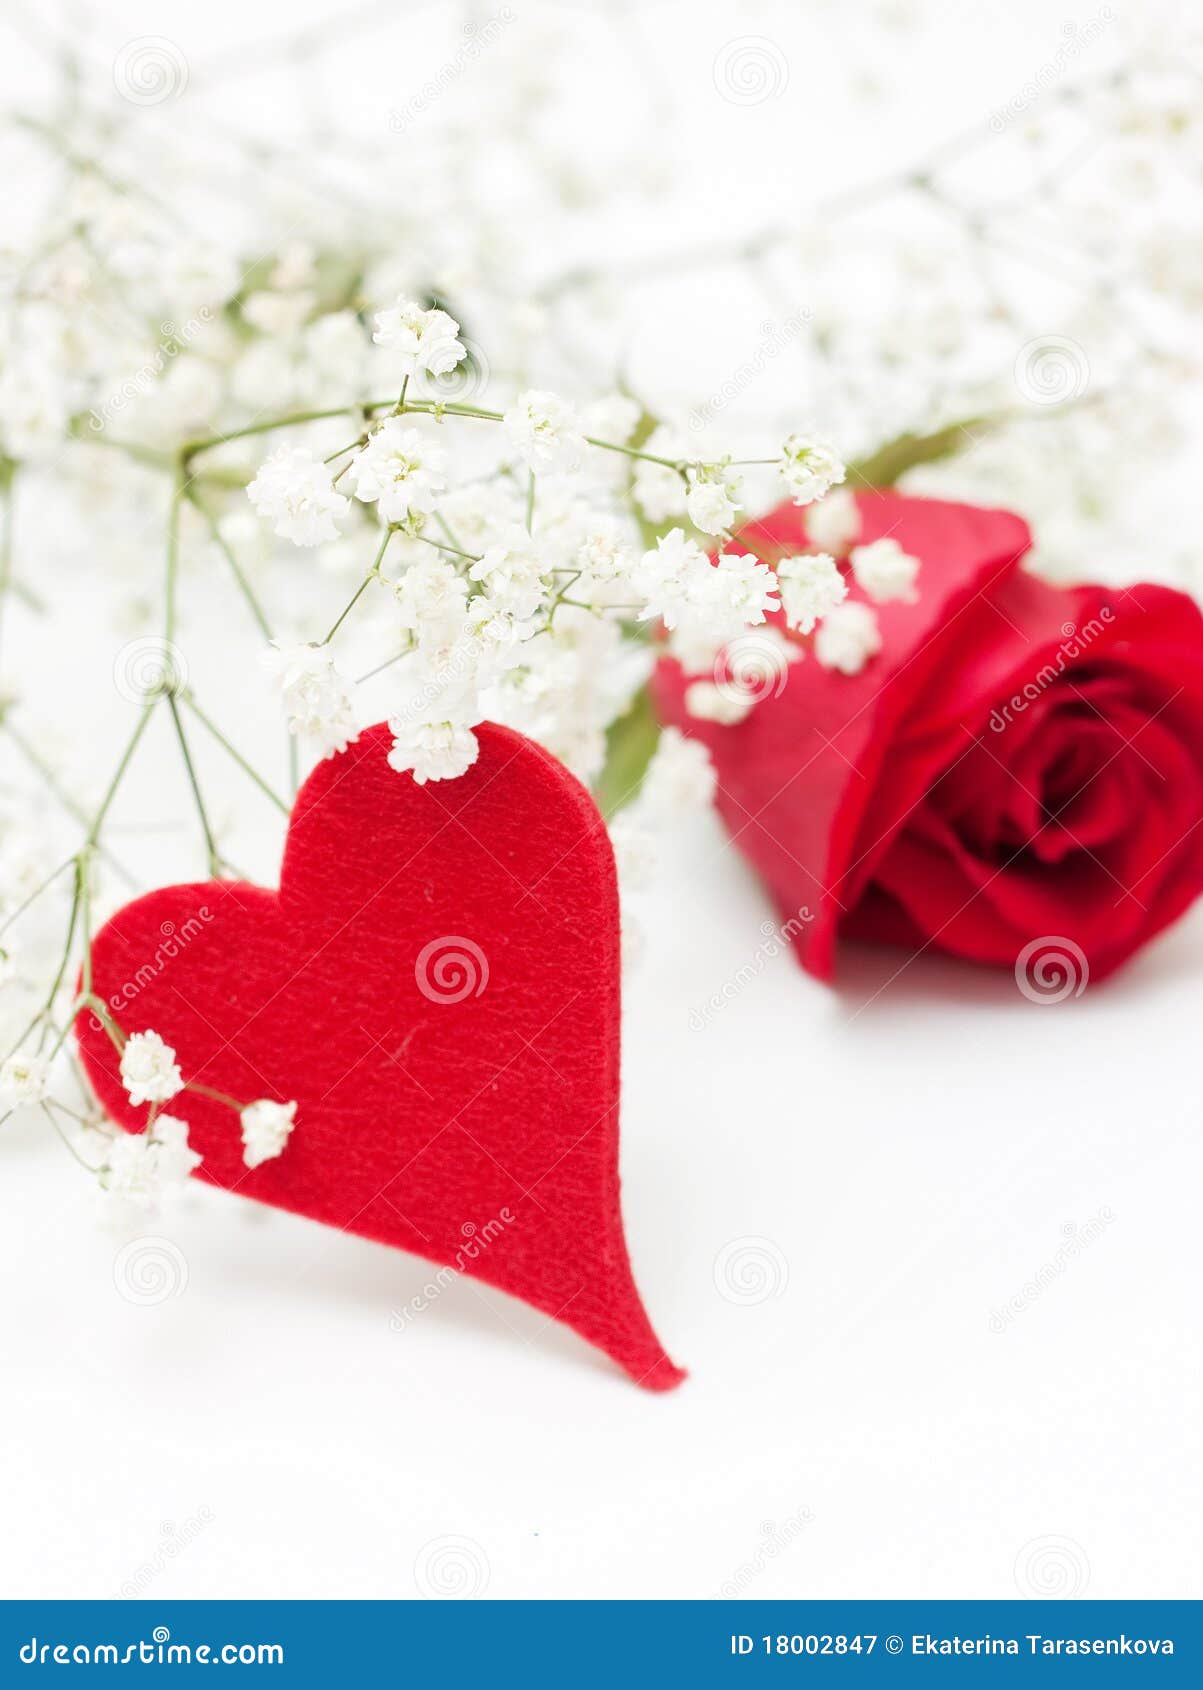 Red Rose Love Heart